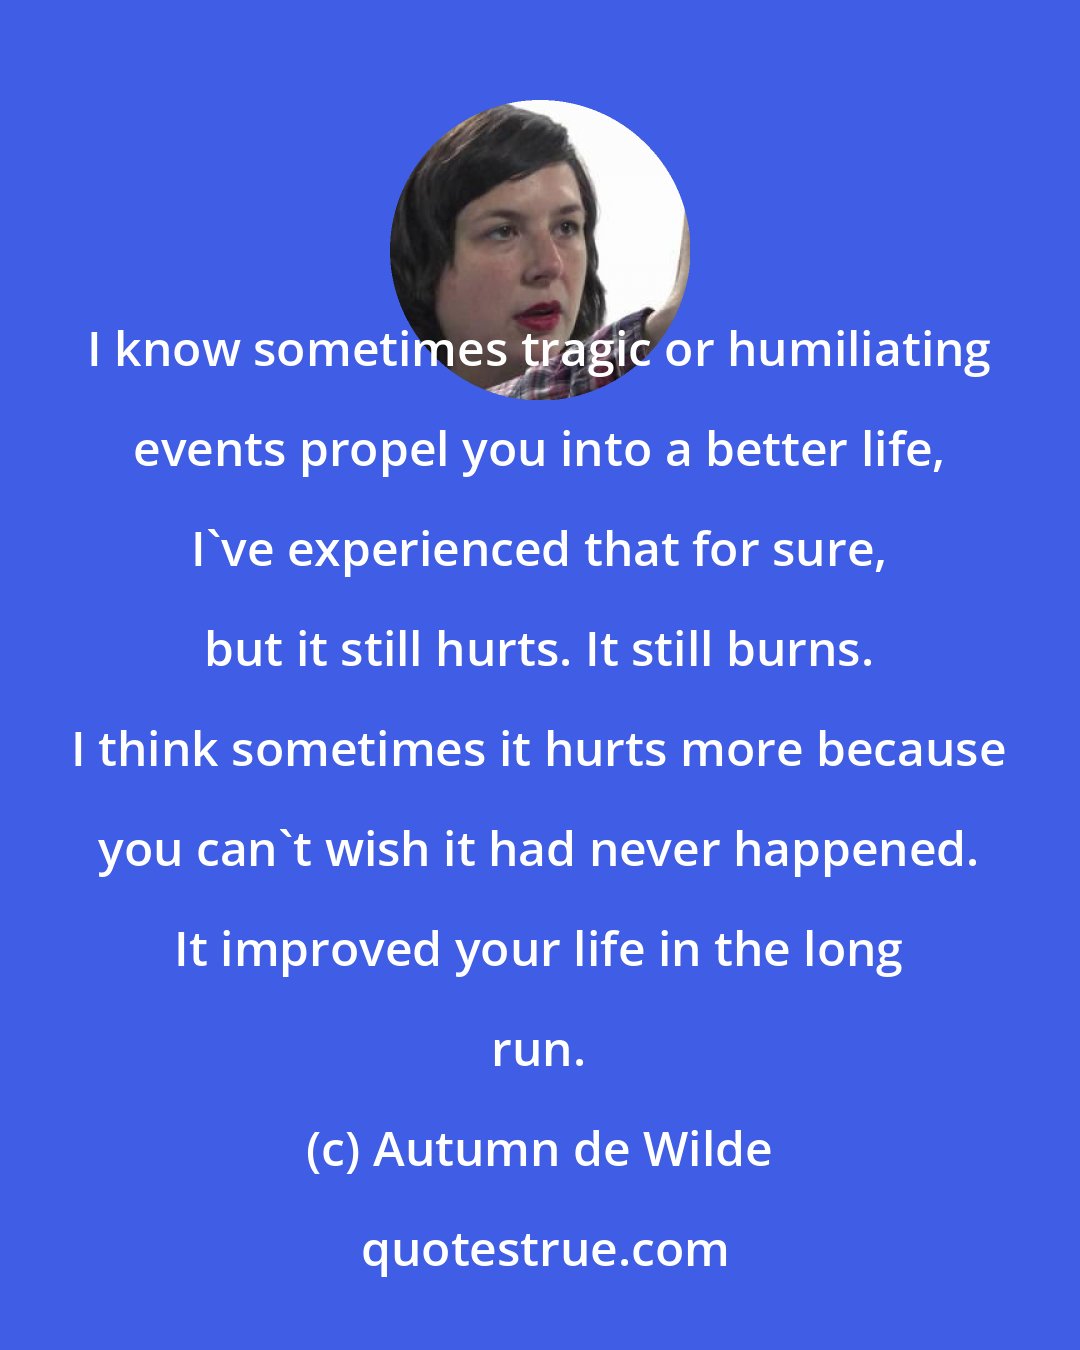 Autumn de Wilde: I know sometimes tragic or humiliating events propel you into a better life, I've experienced that for sure, but it still hurts. It still burns. I think sometimes it hurts more because you can't wish it had never happened. It improved your life in the long run.